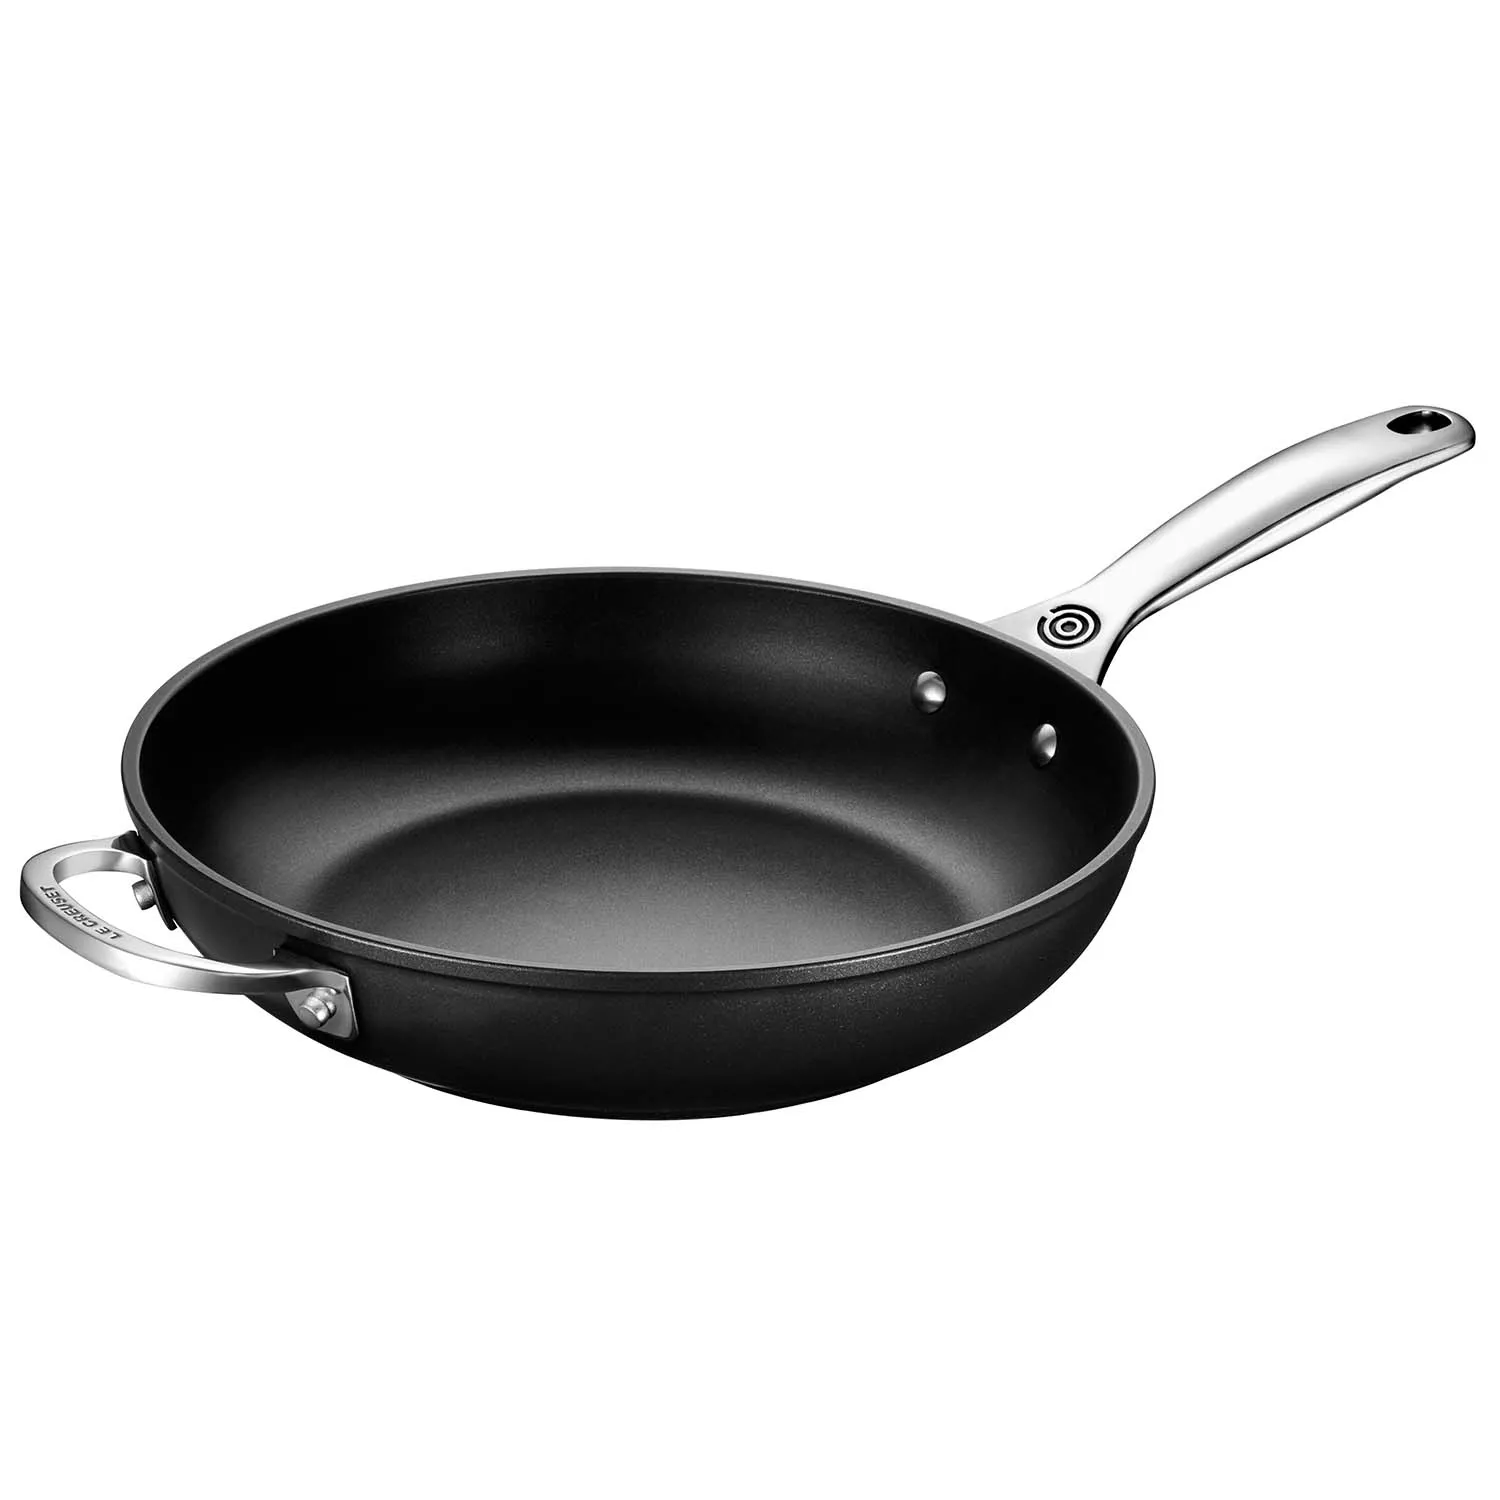 Mason Craft & More 11 in. Cast Iron Covered Fry Pan, Black